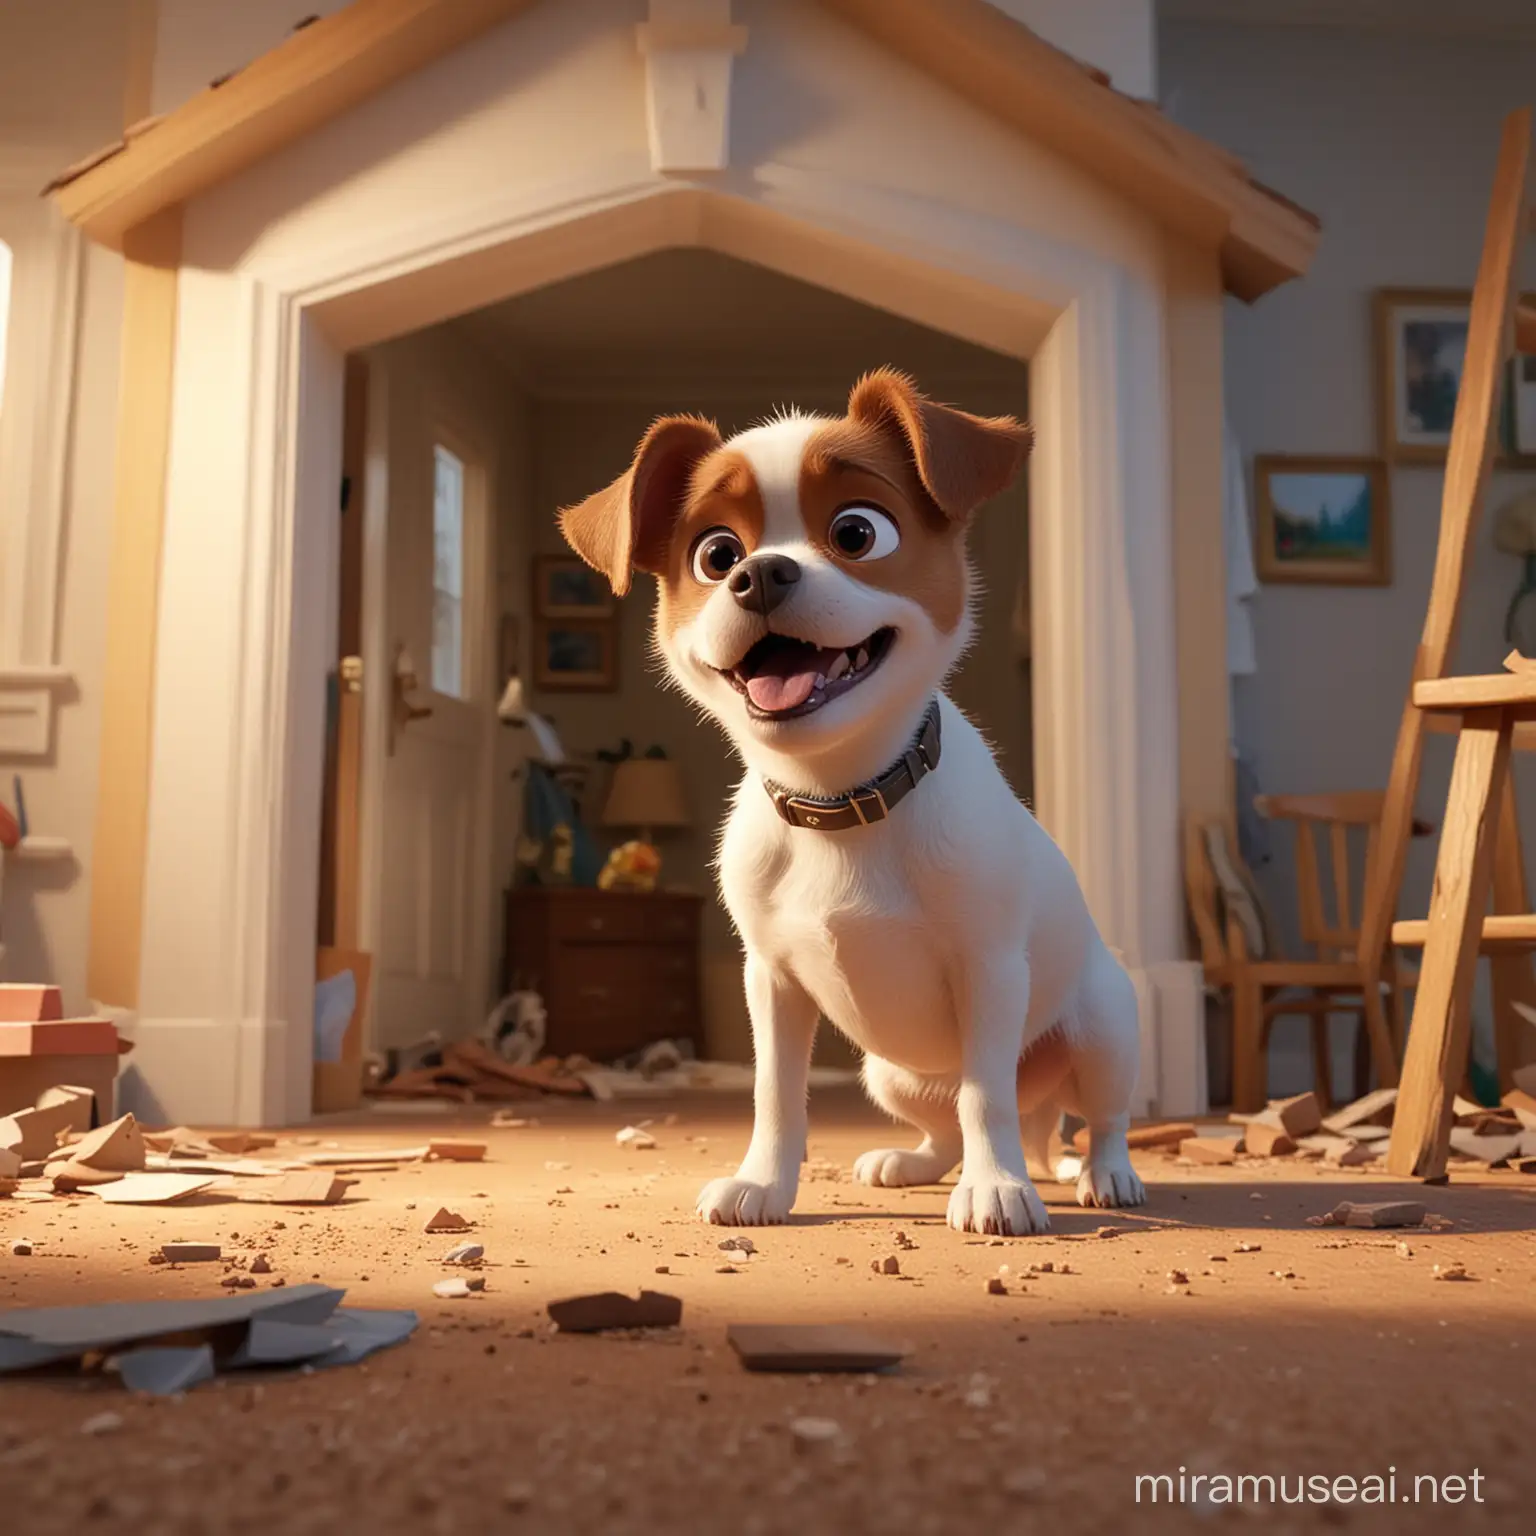  the mischievous little dog demolishing the house, a man in  very bad mood  ,disney pixar style